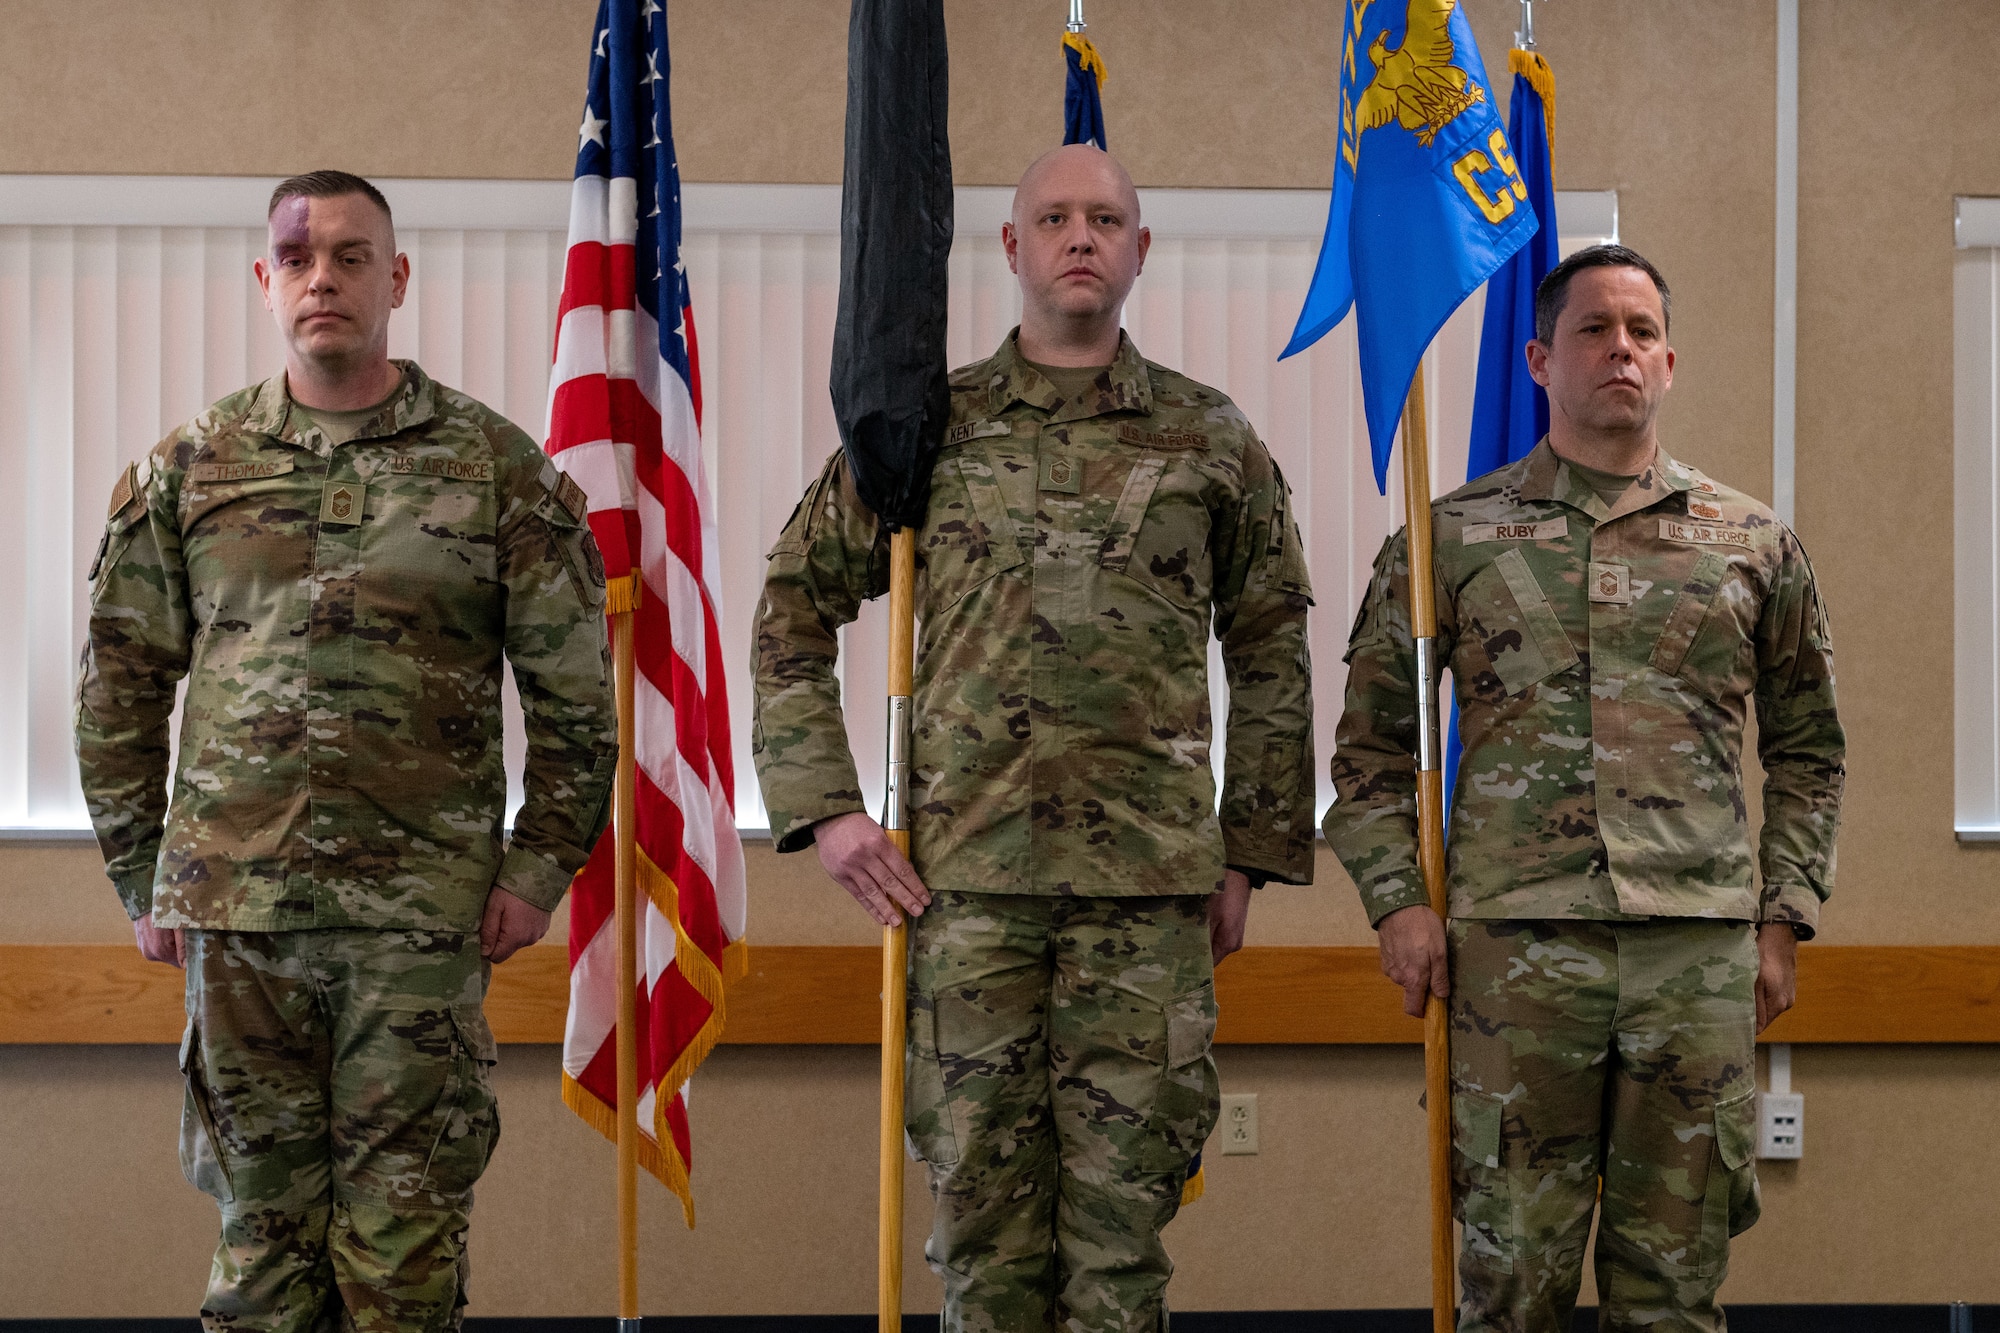 three men stand at attention, two of them are holding guidons